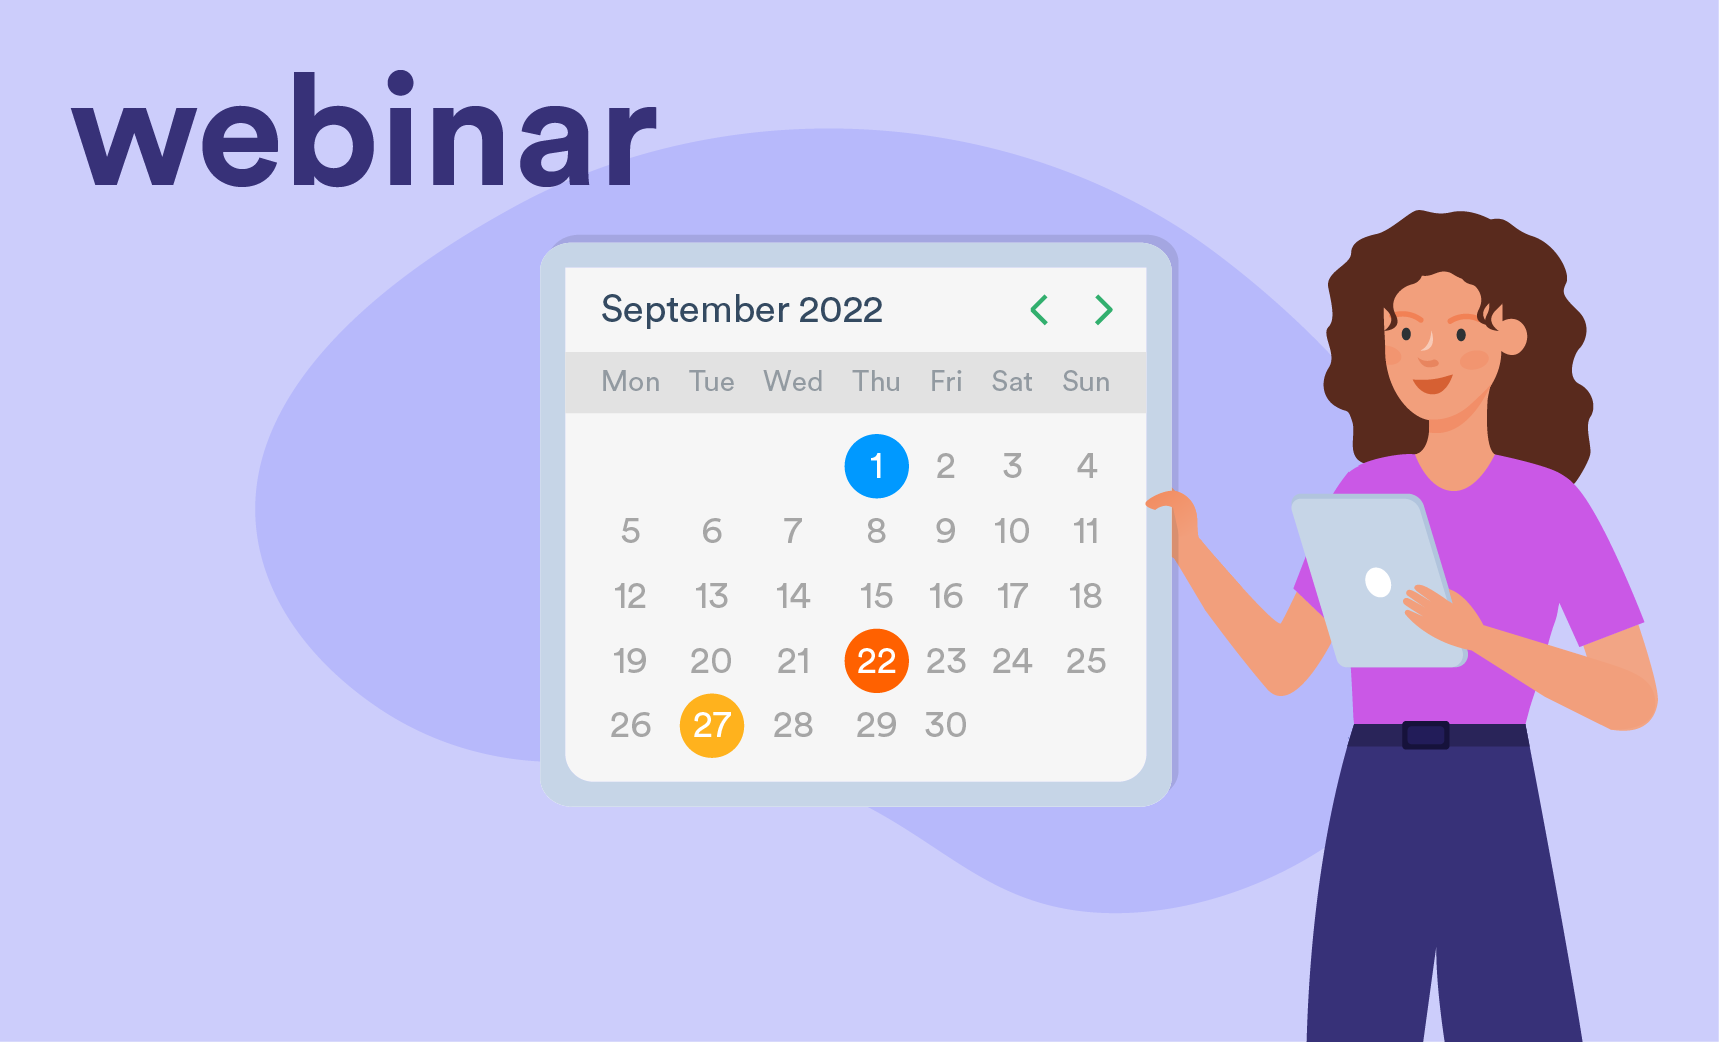 3 upcoming webinars you don’t want to miss